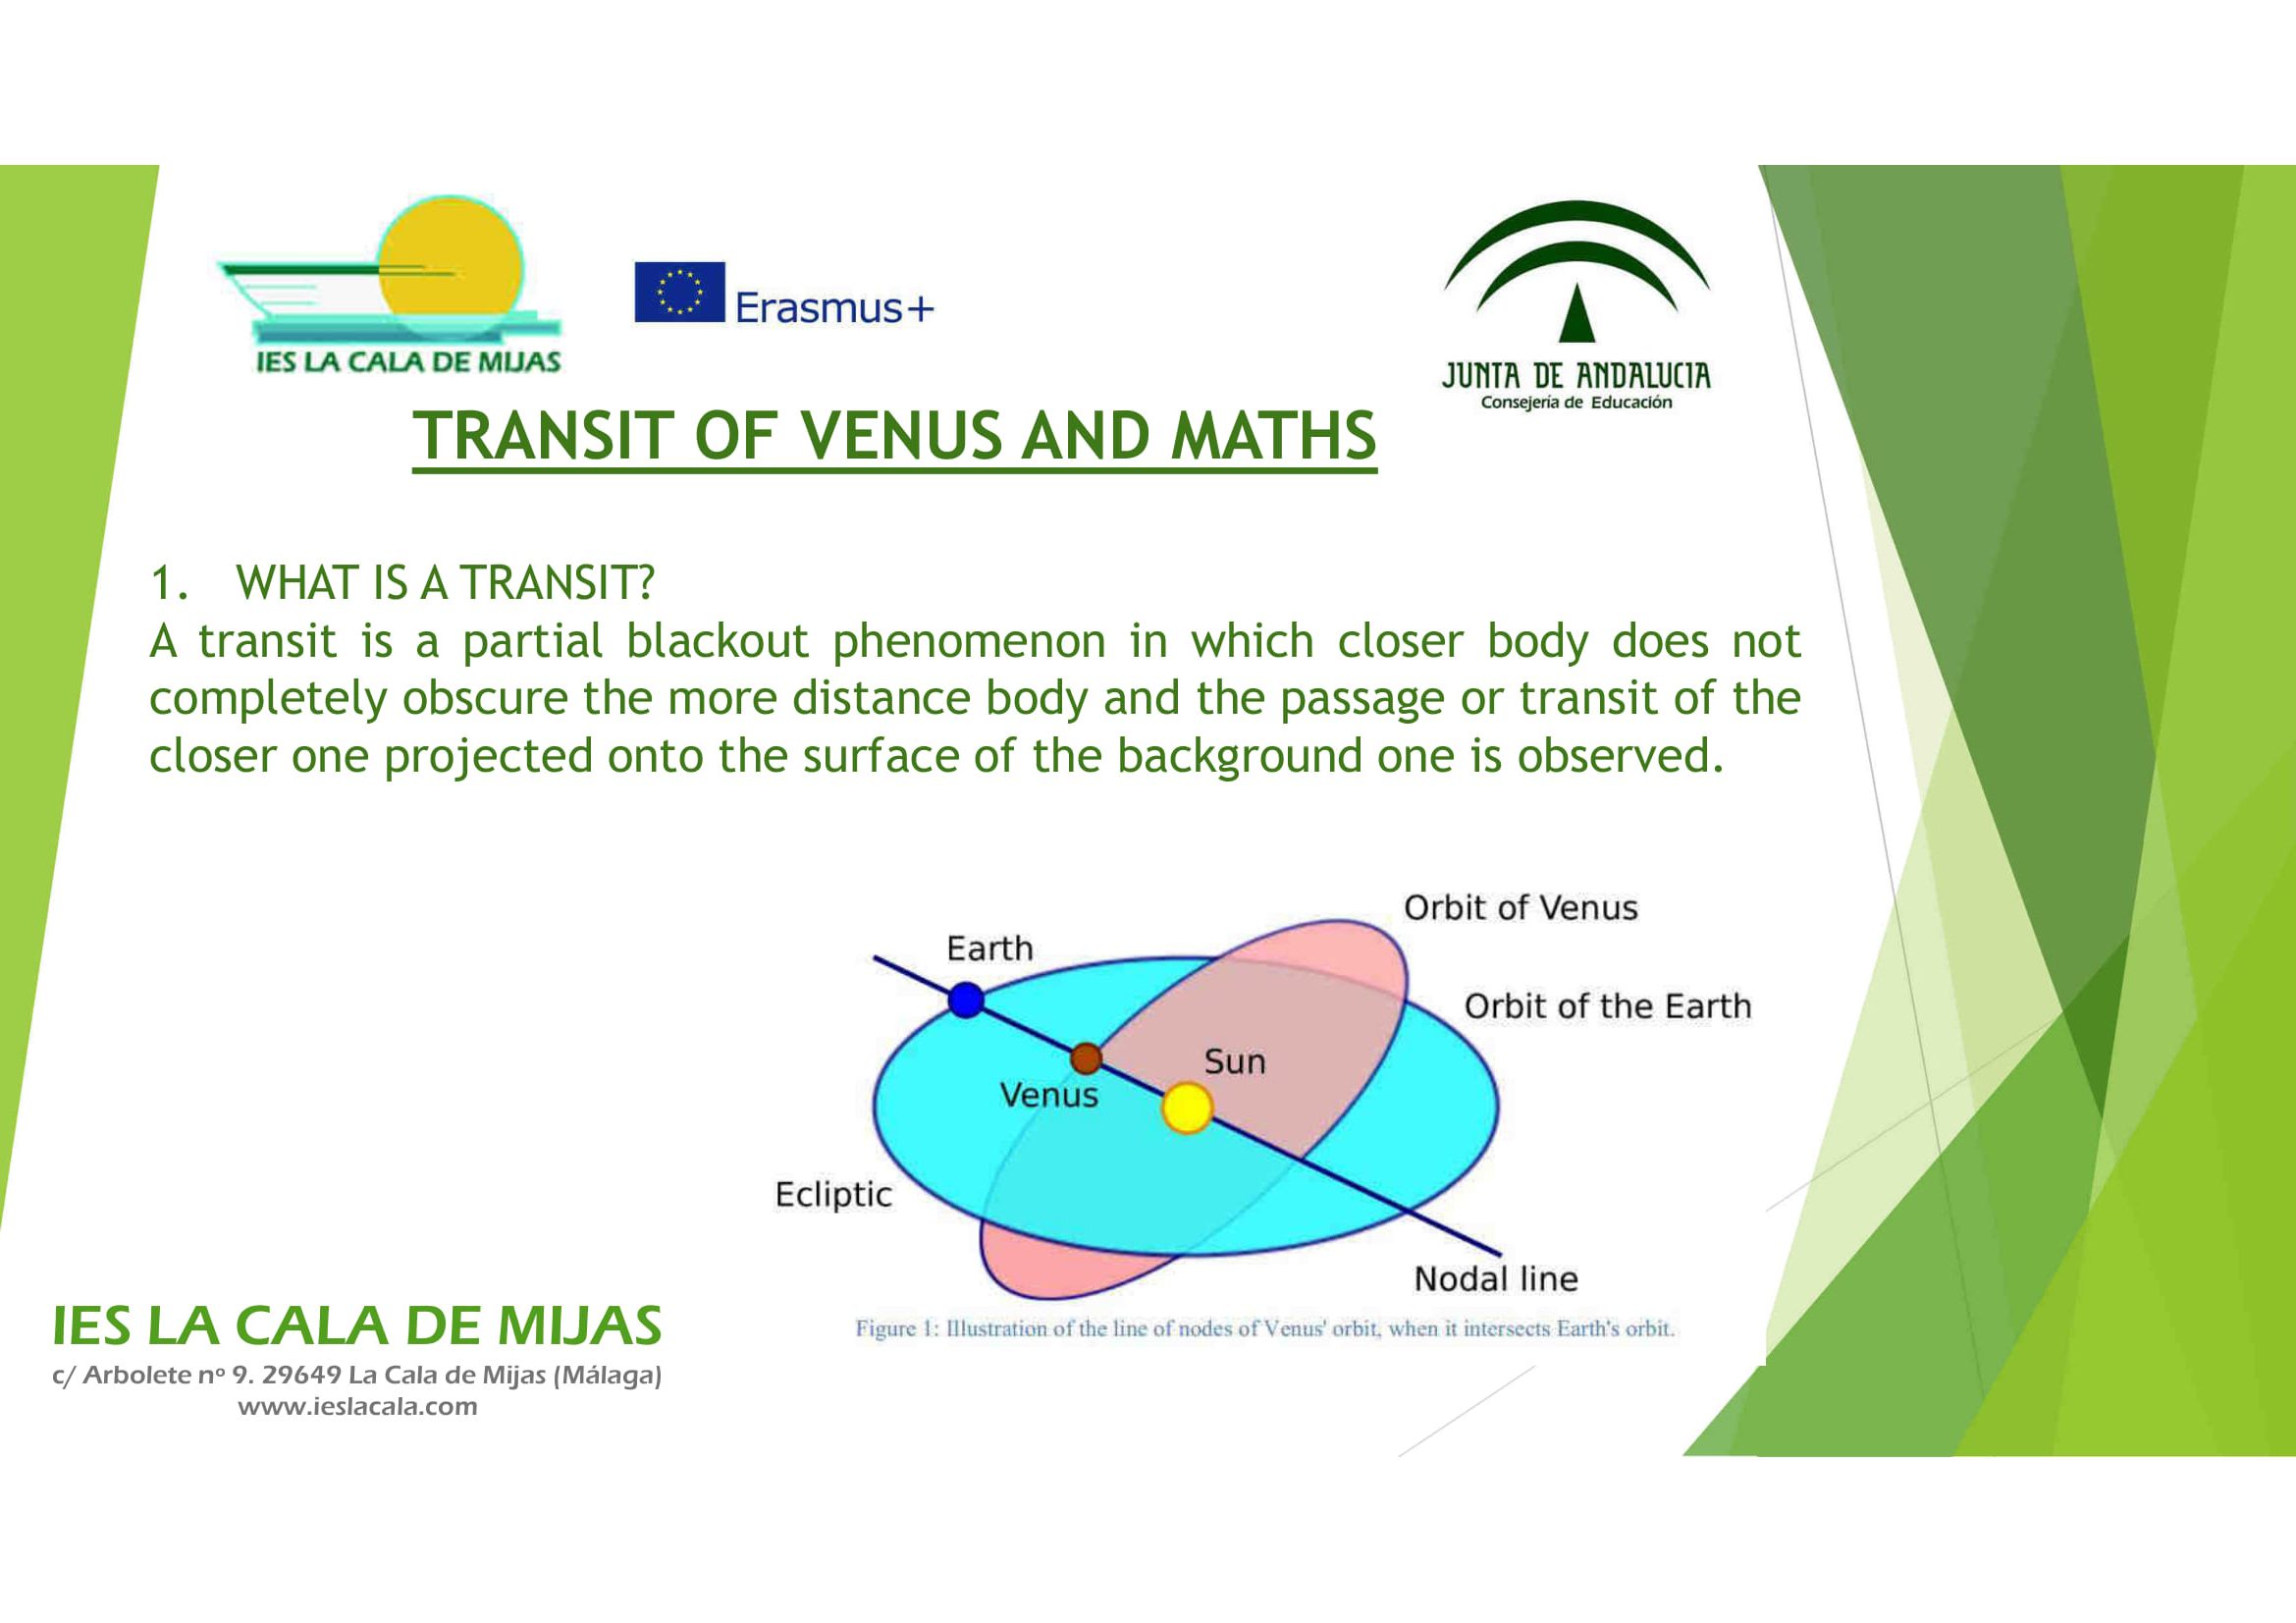 MATHS IN SPACE: Transit of Venus and Maths